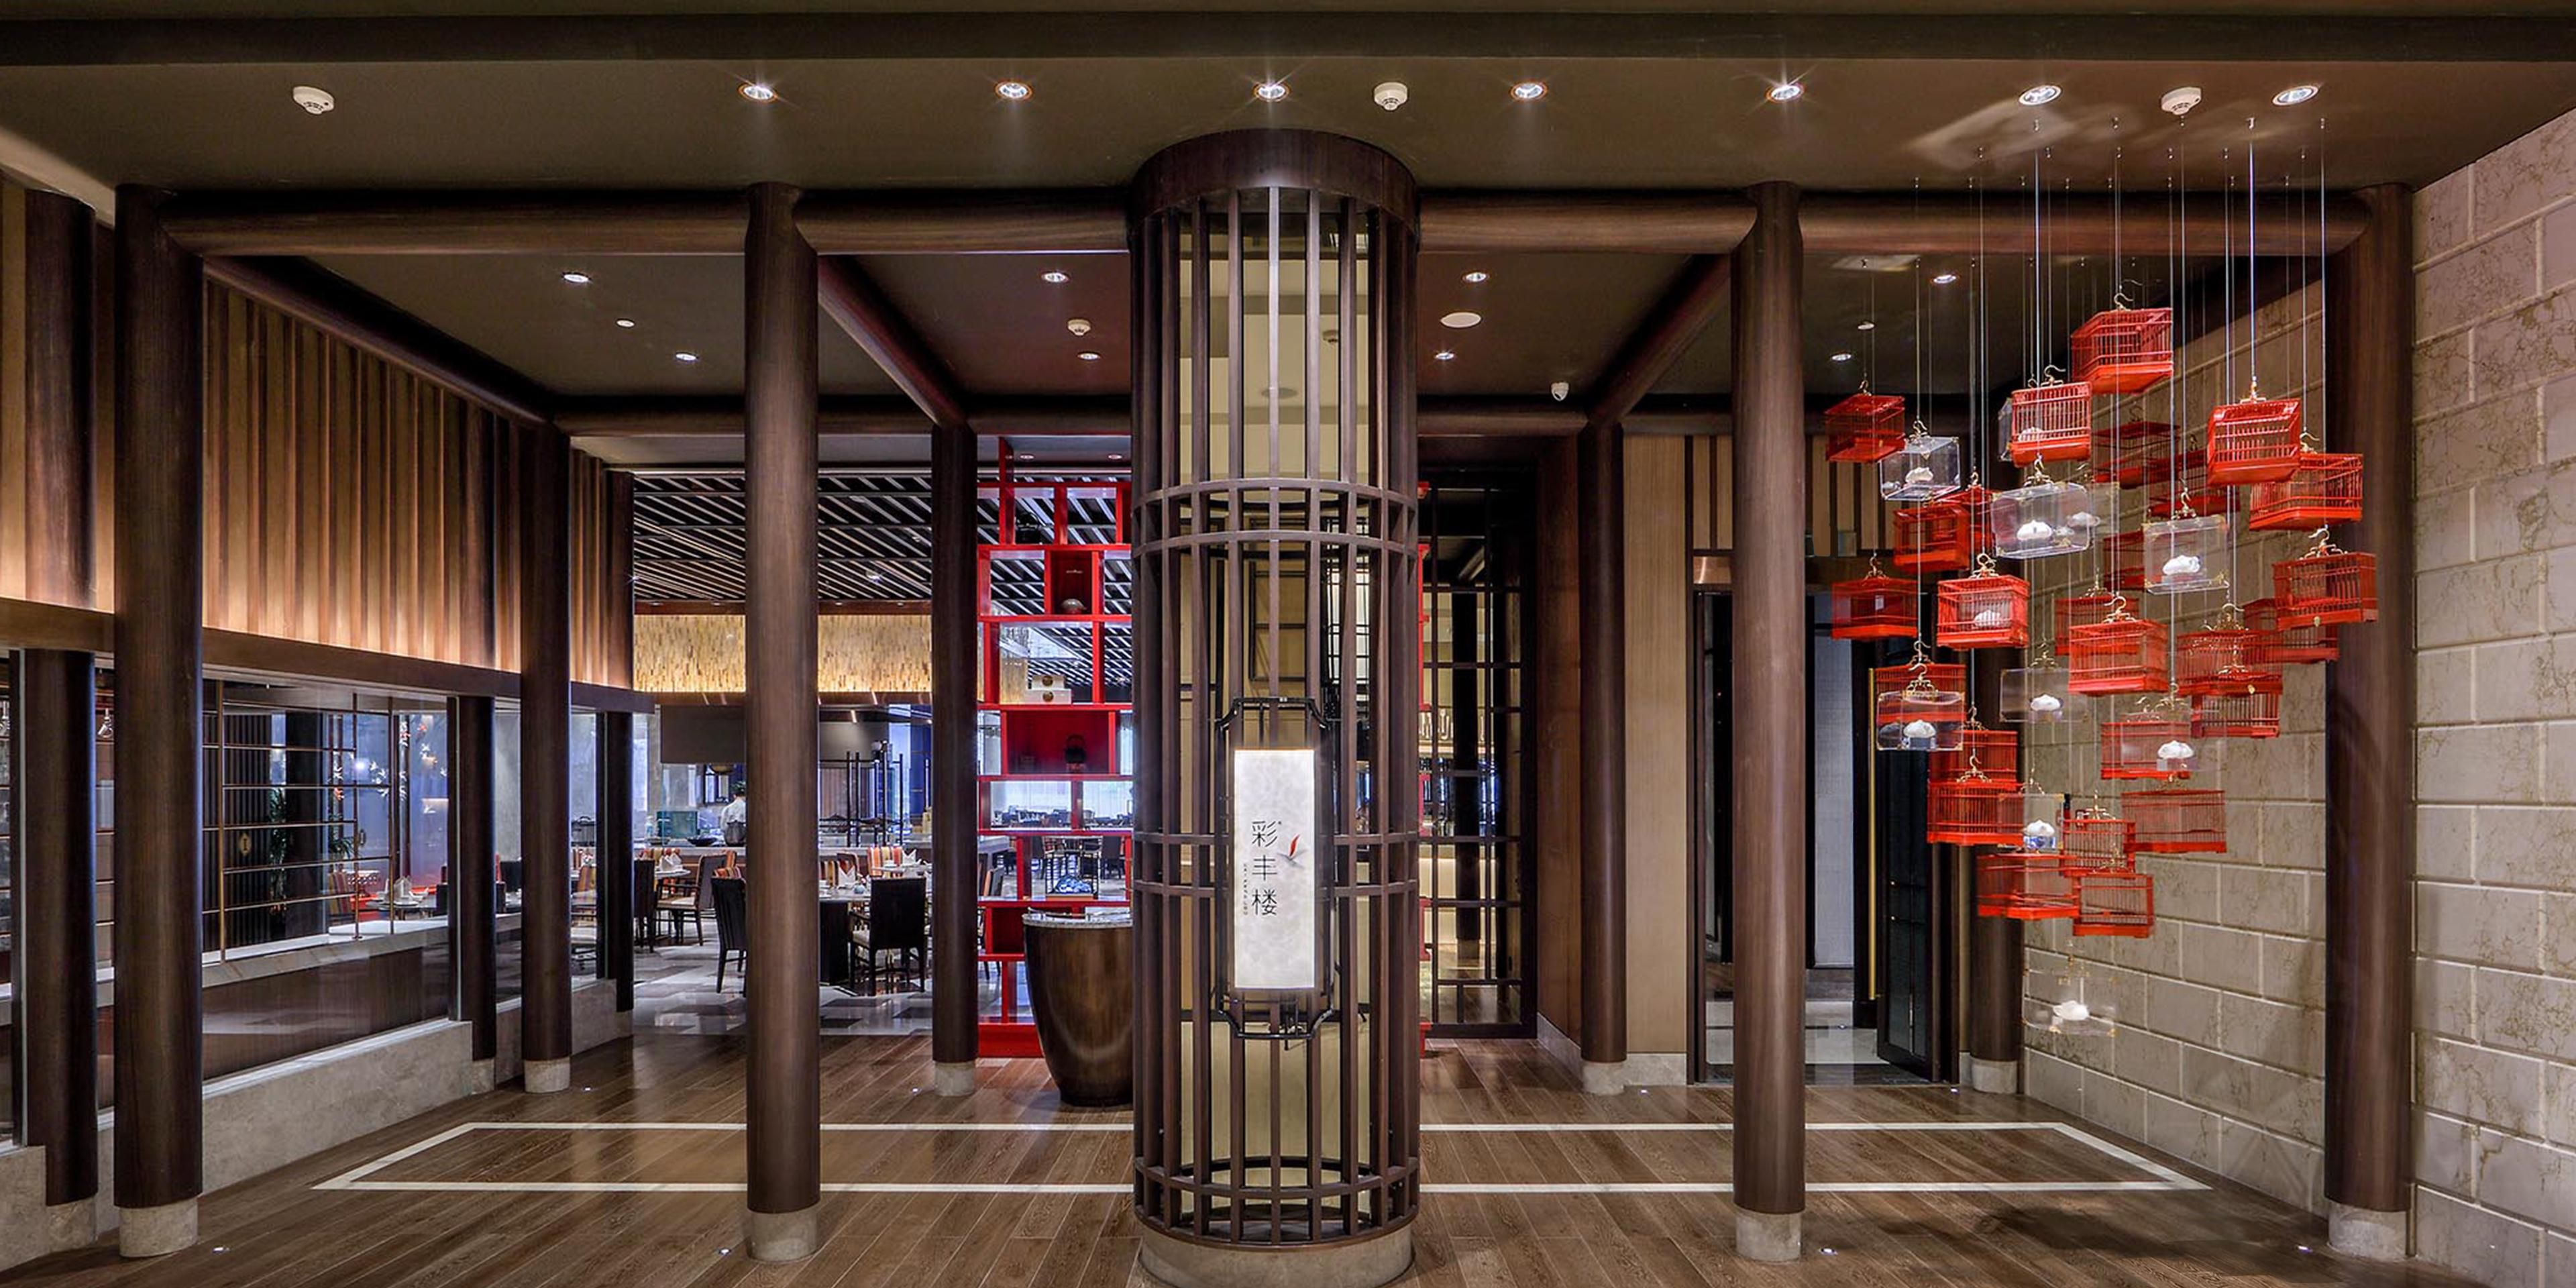 Cai Feng Lou, a modern formal Chinese restaurant operated by IHG, provides consistently renowned signature dishes and Guangdong / Tianjin inspired seasonal delights. It tailors to guests with sophisticated taste in food and enjoys a high-end ambience.